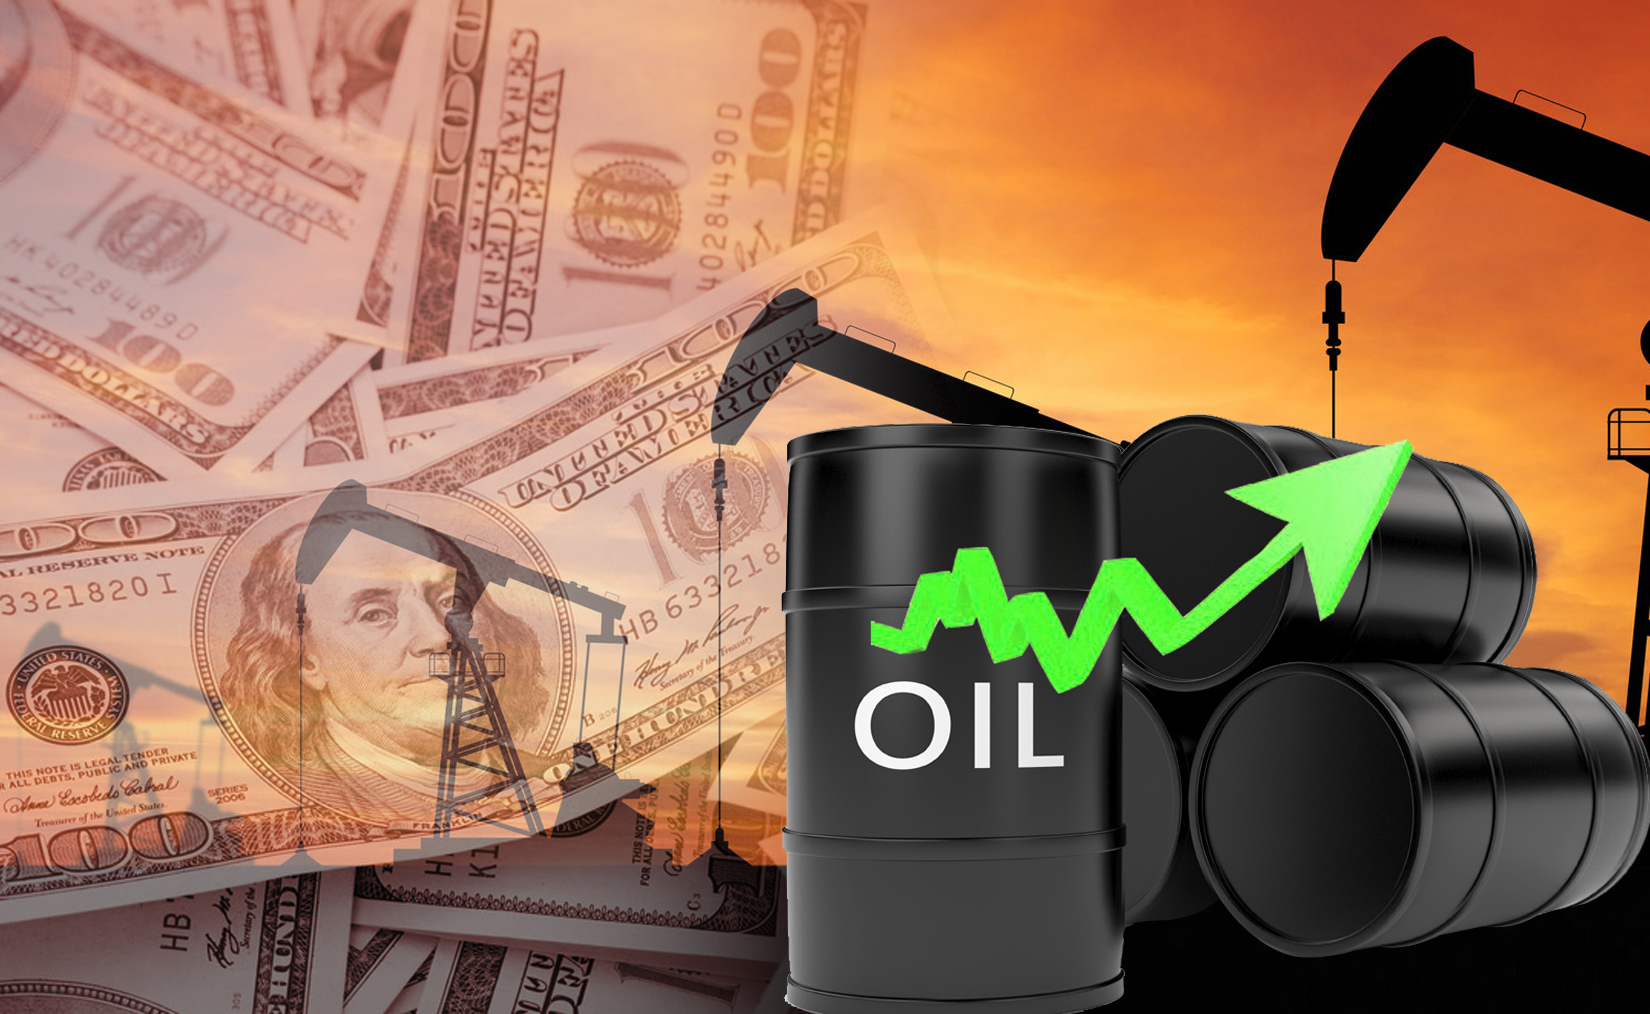 Kuwait oil price up 54 cents to USD 48.90 pb                                                                                                                                                                                                              